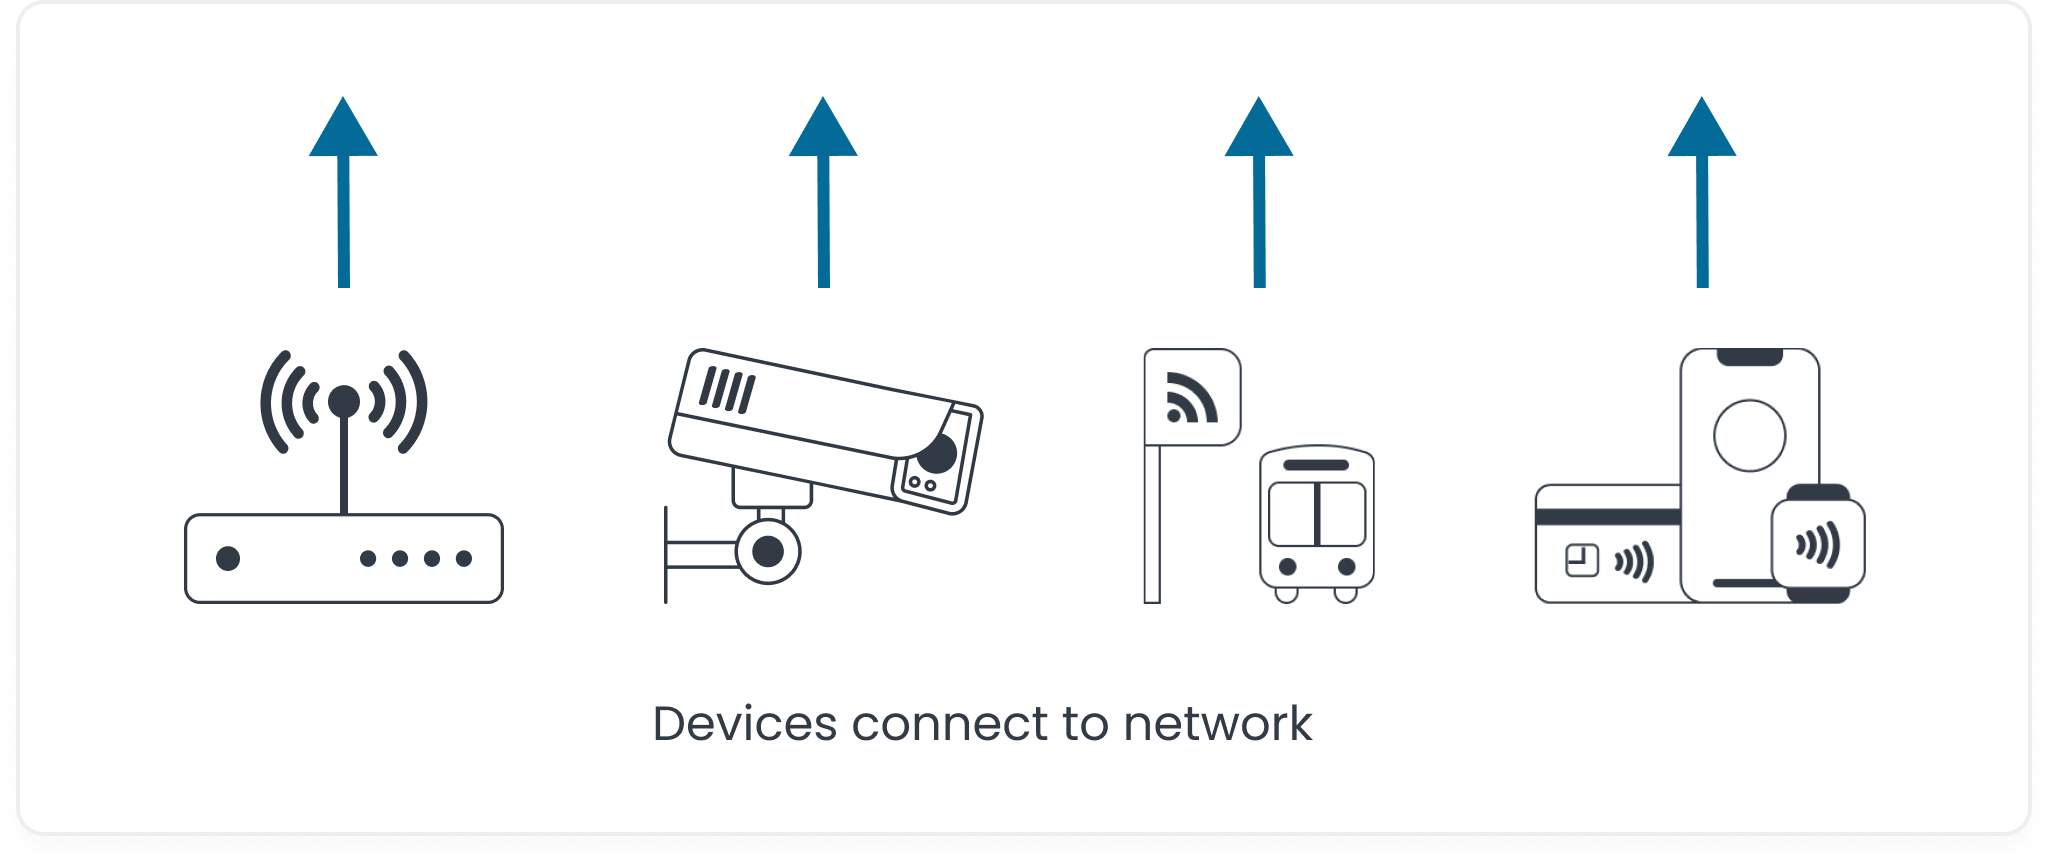 Devices connect to network.